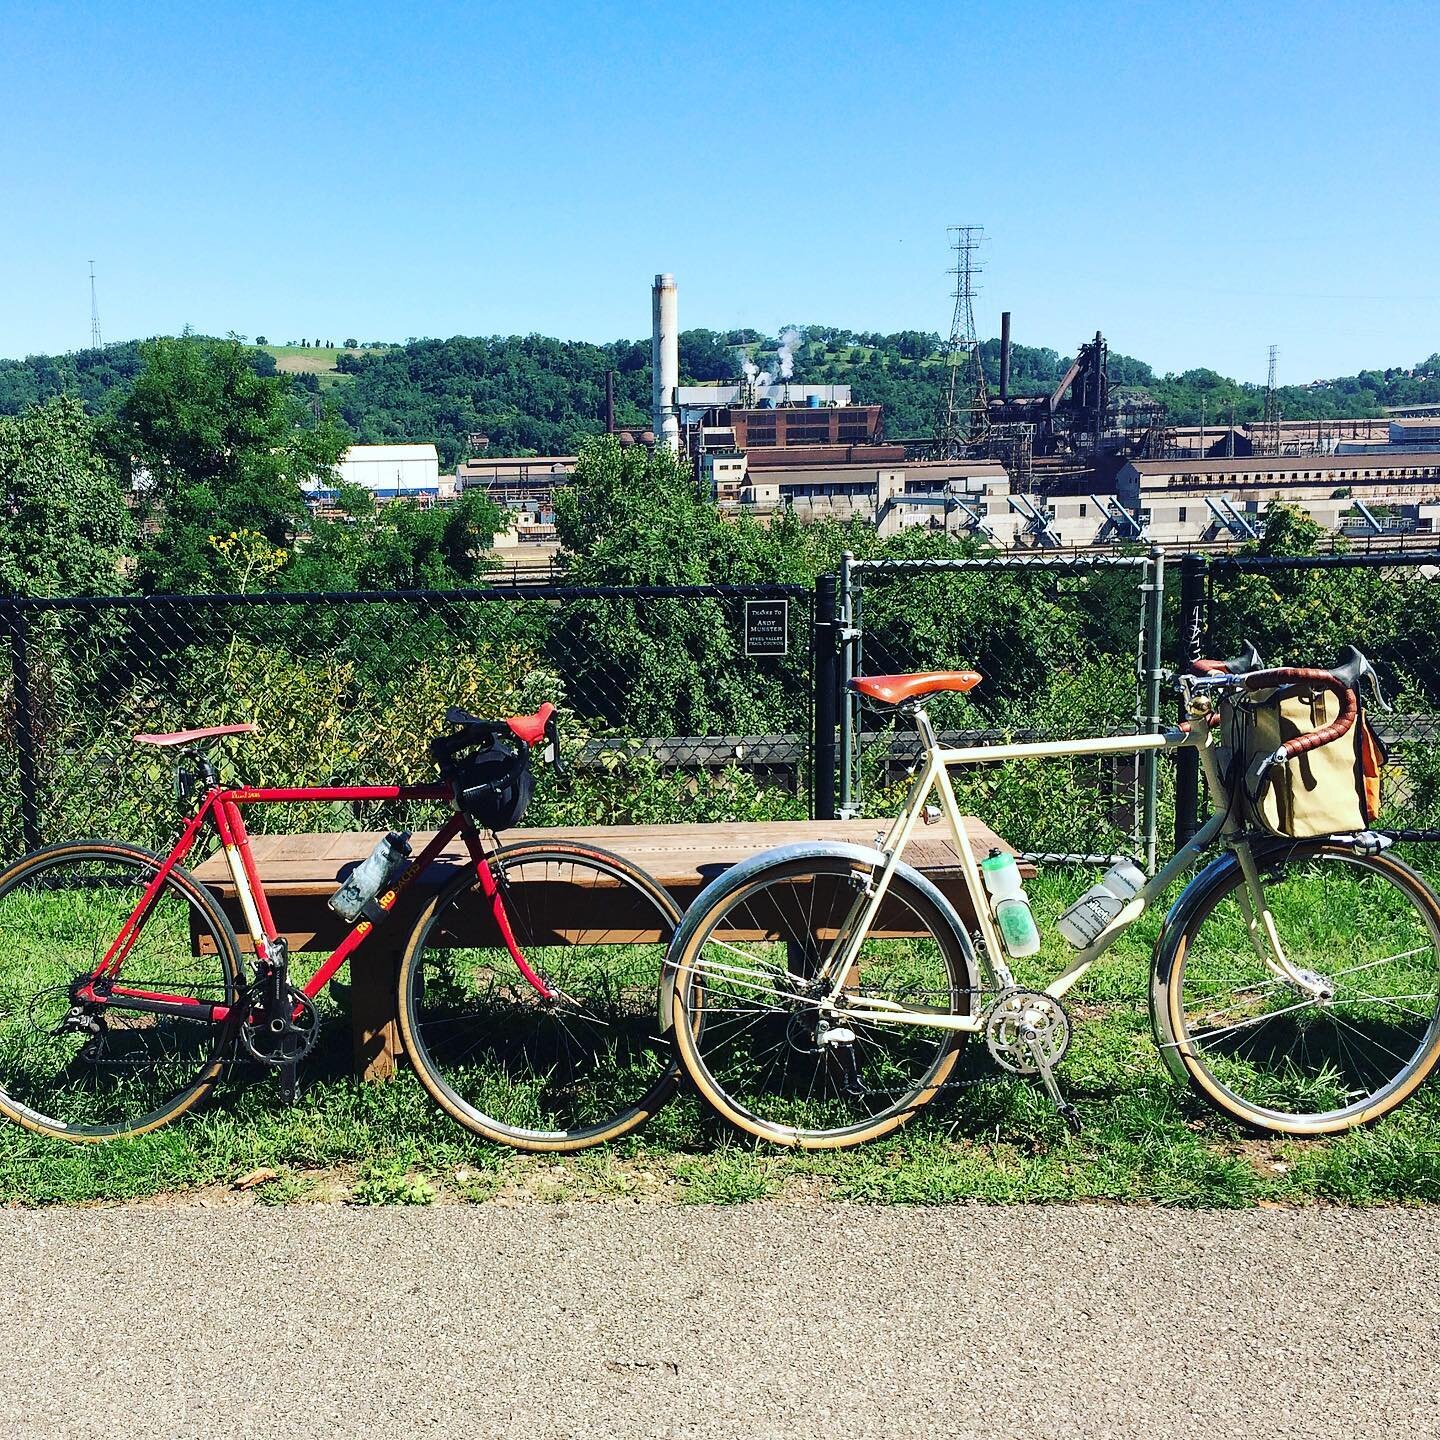 Edgar Thompson Works. Braddock, PA. since 1872. @therichardsachs spotted in the wild with a coast cycle. Sent in by a pal and customer @asc.pgh on their ride today. And @rivetress on the coast cycle!